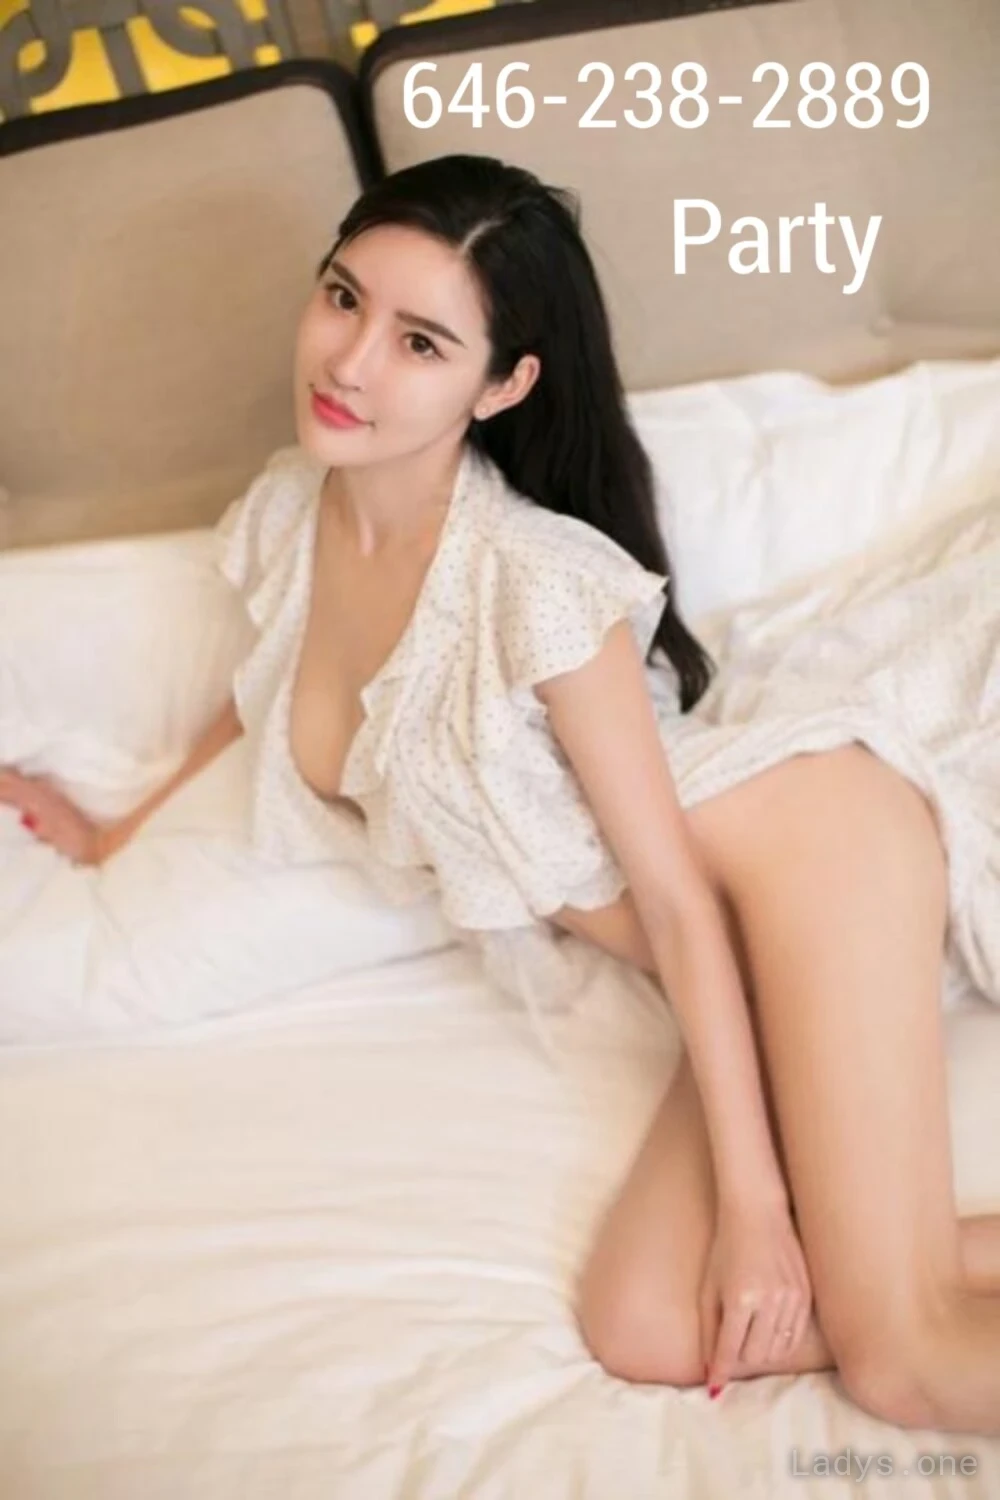 Asian Party Girl, 23 years beautiful nude Manhattan escorts girl, height 160 sm, Weight 46 kg